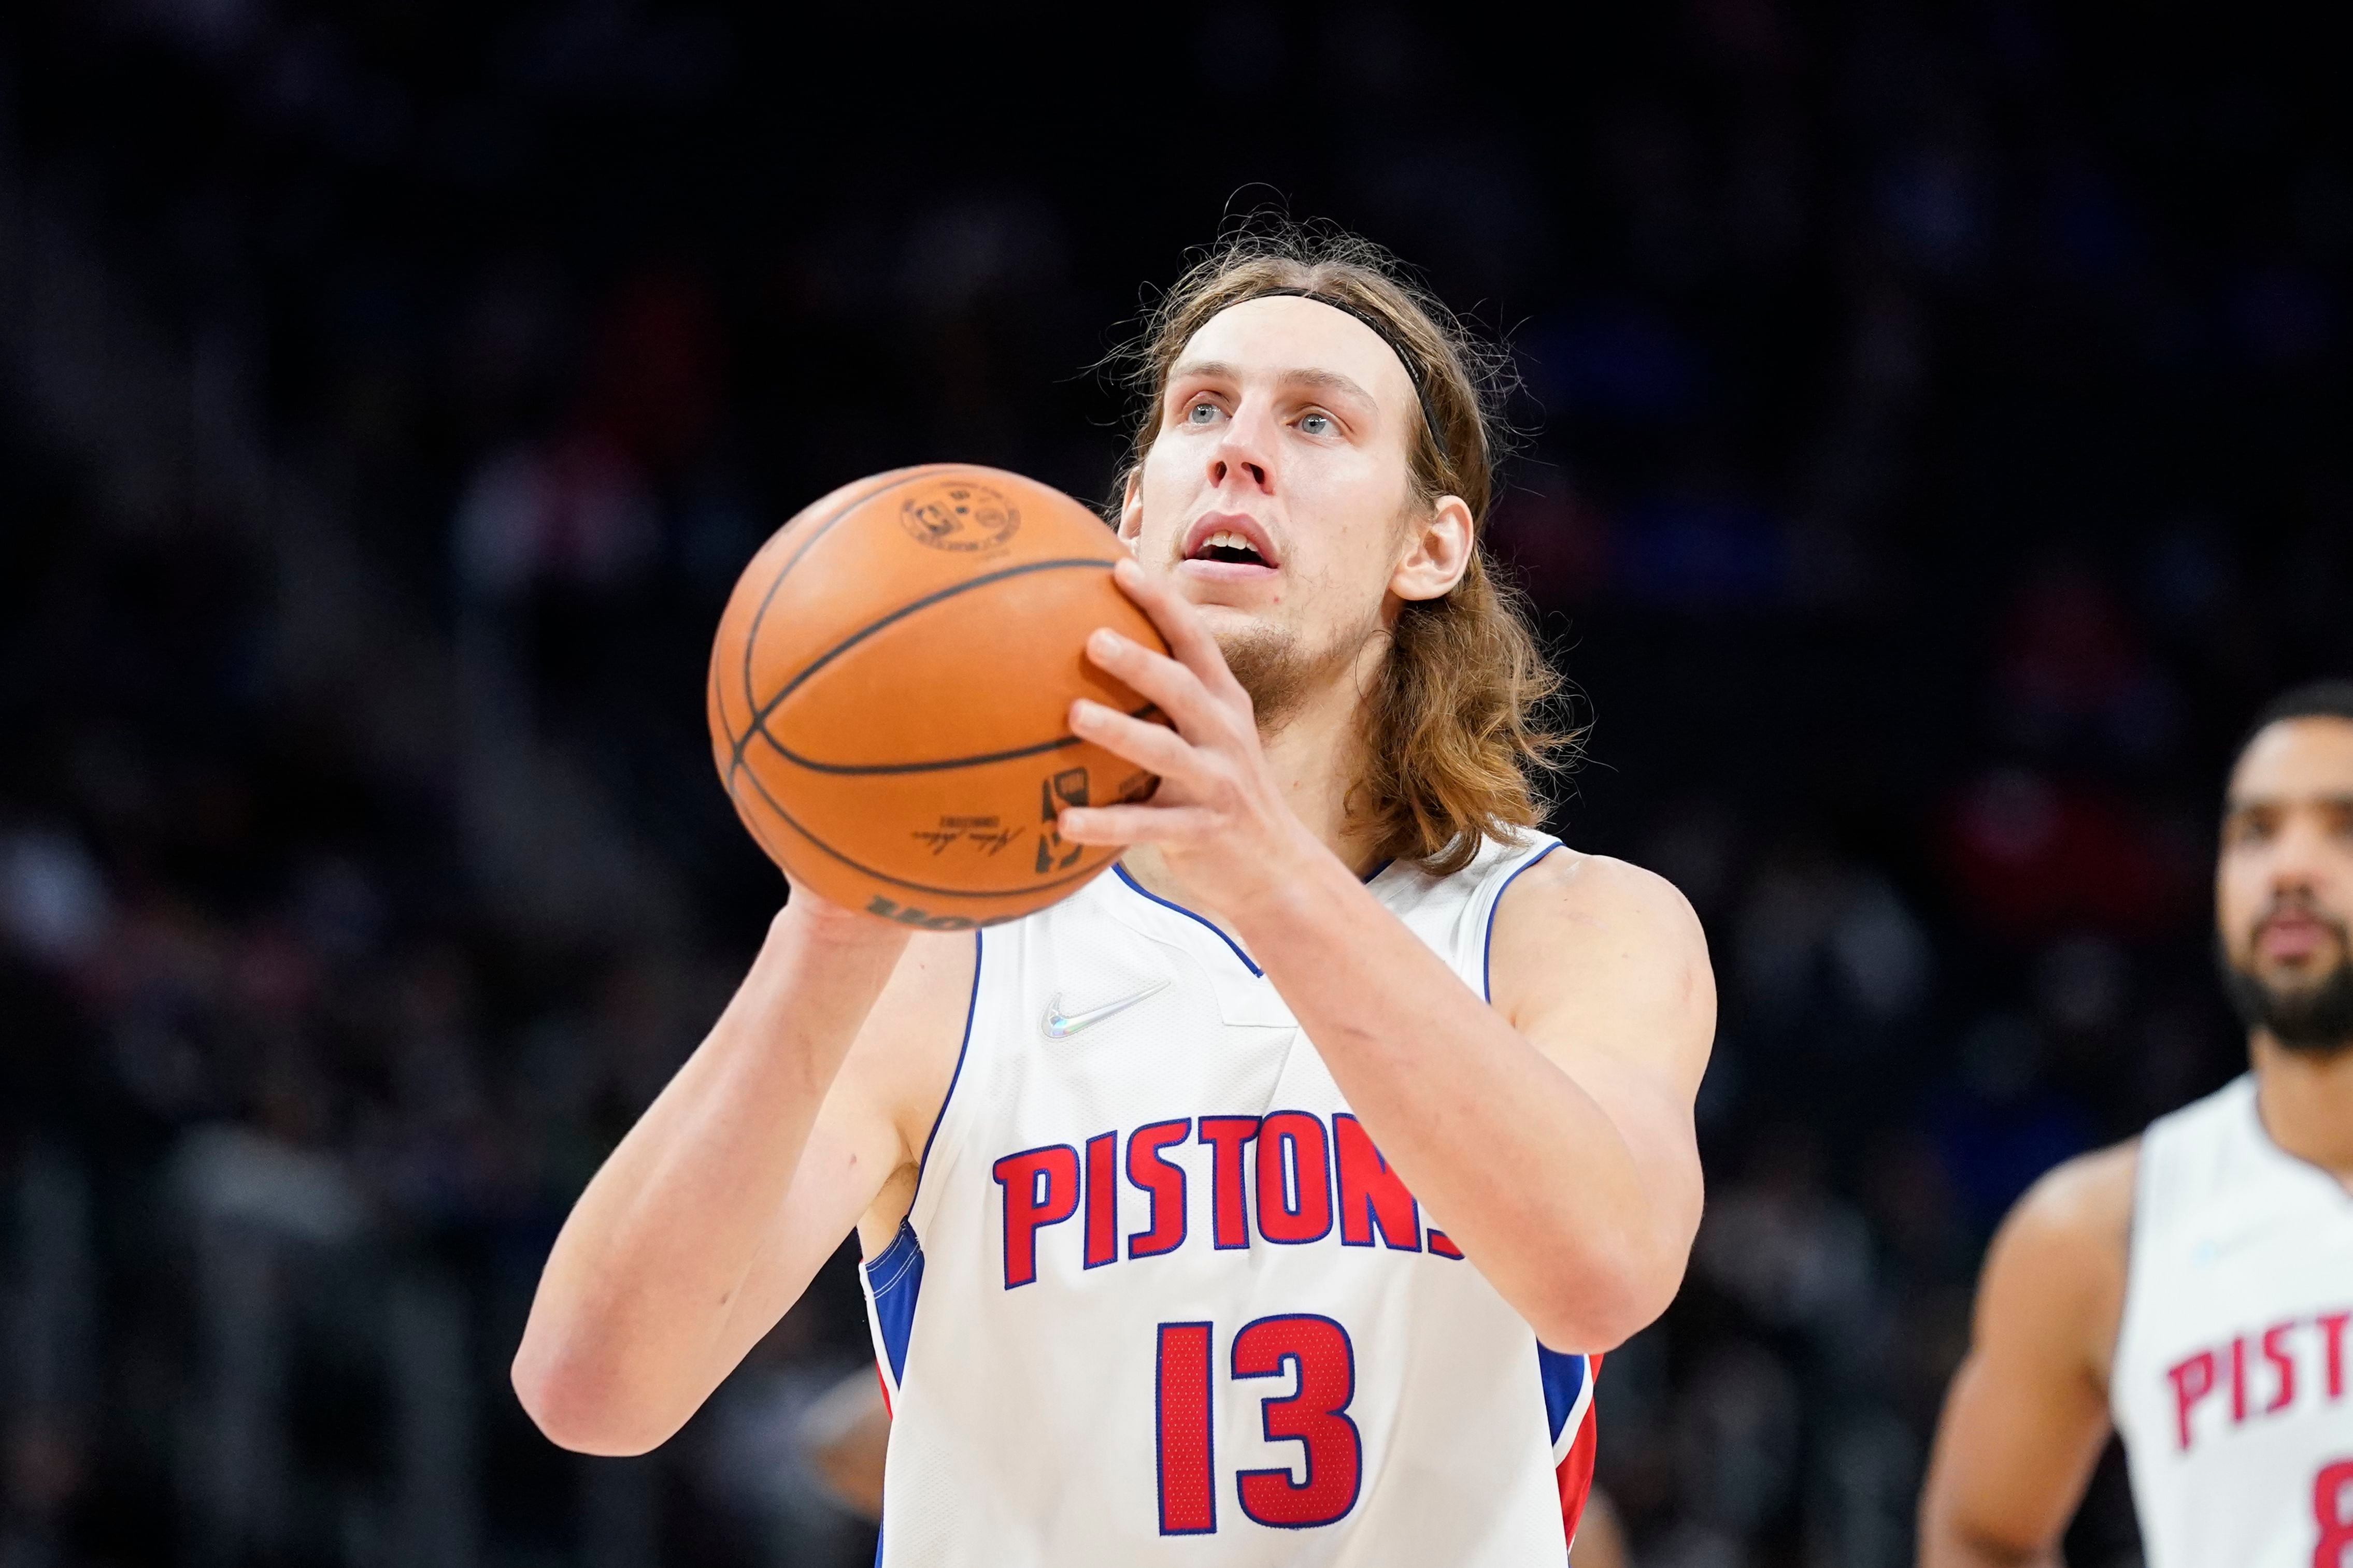 With no backup center, I hope we trade for Kelly Olynyk. I think he fits  what our team needs : r/lakers